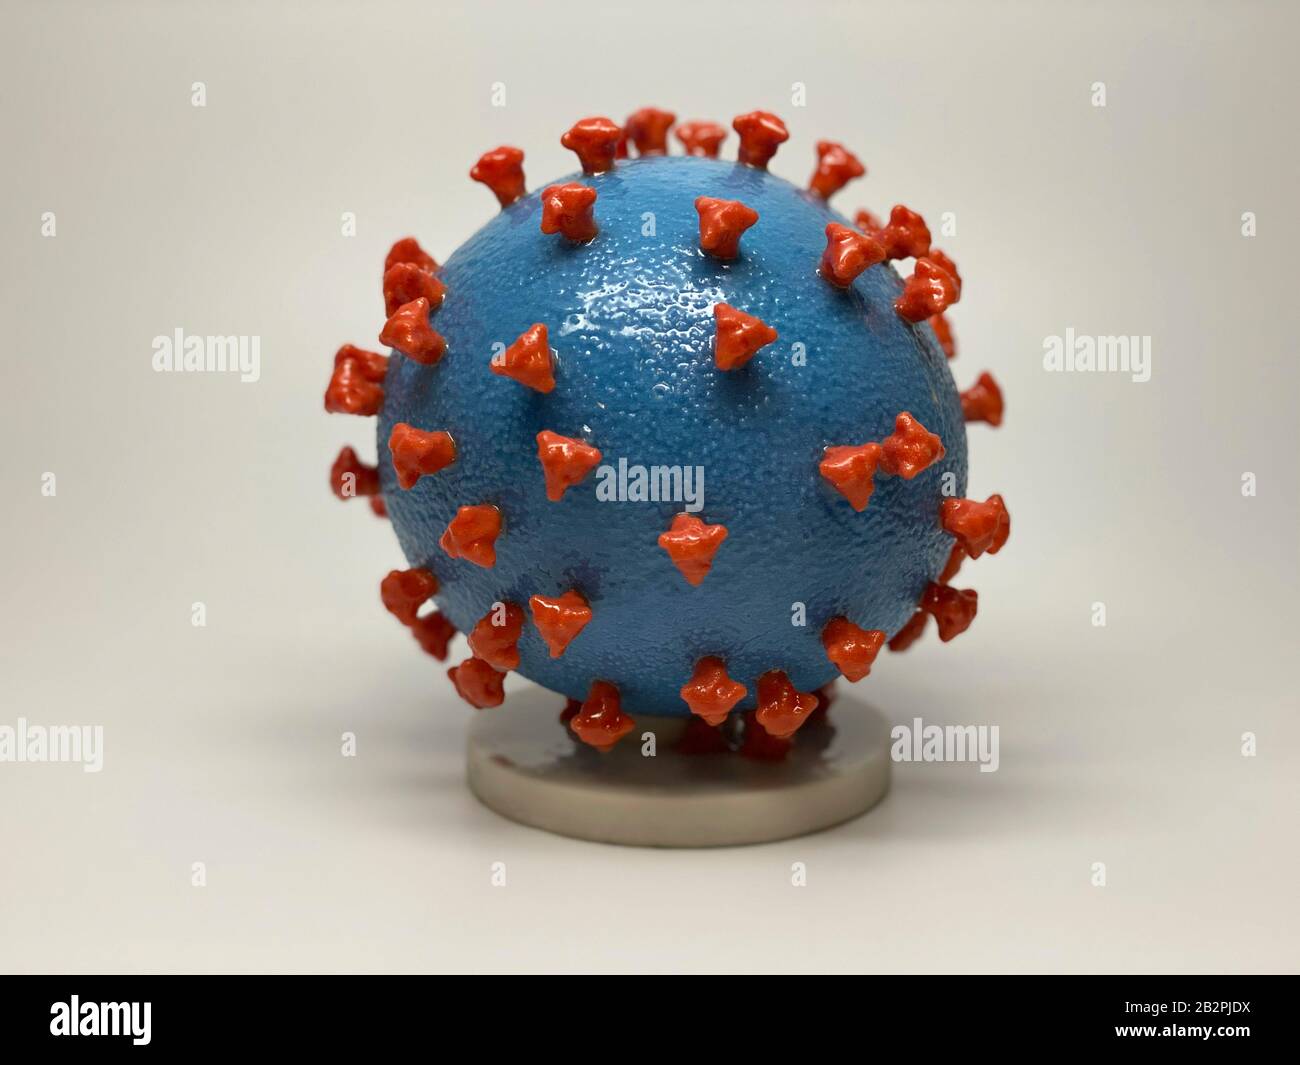 A three dimensional model of COVID-19, novel coronavirus, virus particles at the NIAID Integrated Research Facility February 18, 2020 in Fort Detrick, Maryland. Stock Photo